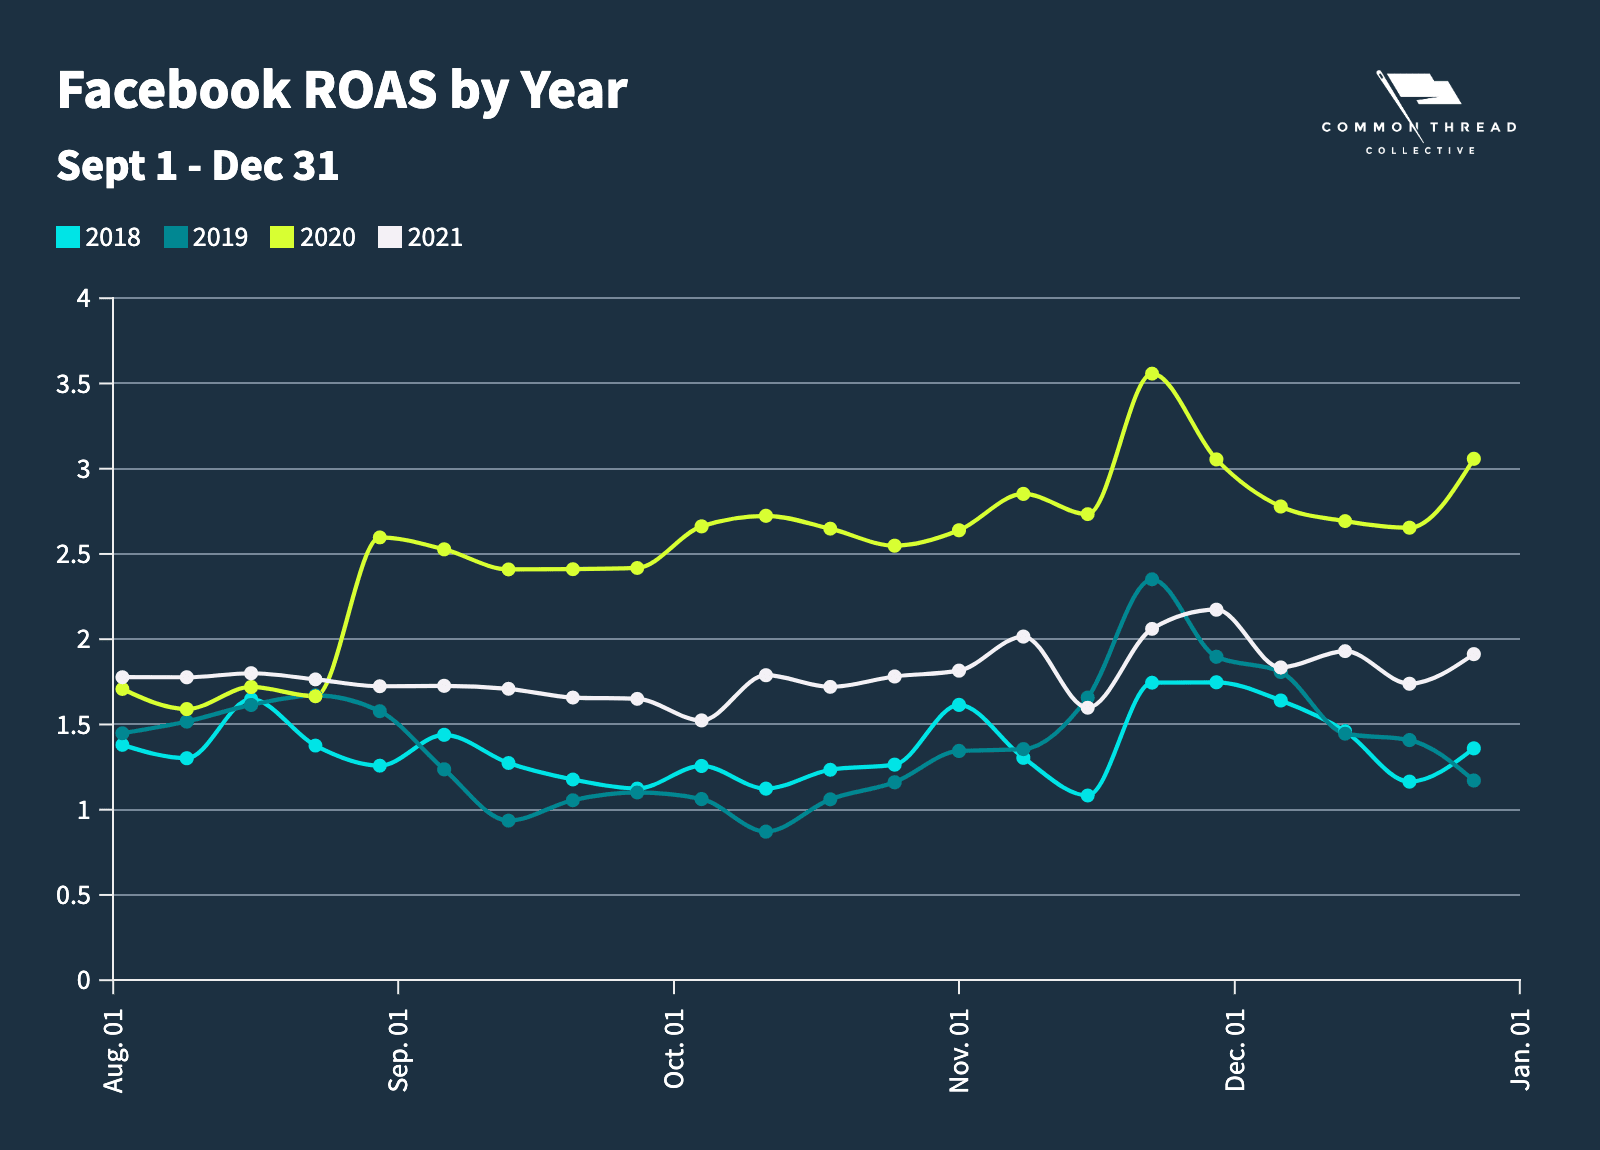 Facebook ROAS by Year: Sept 1 - Dec 31 (2018, 2019, 2020, and 2021)